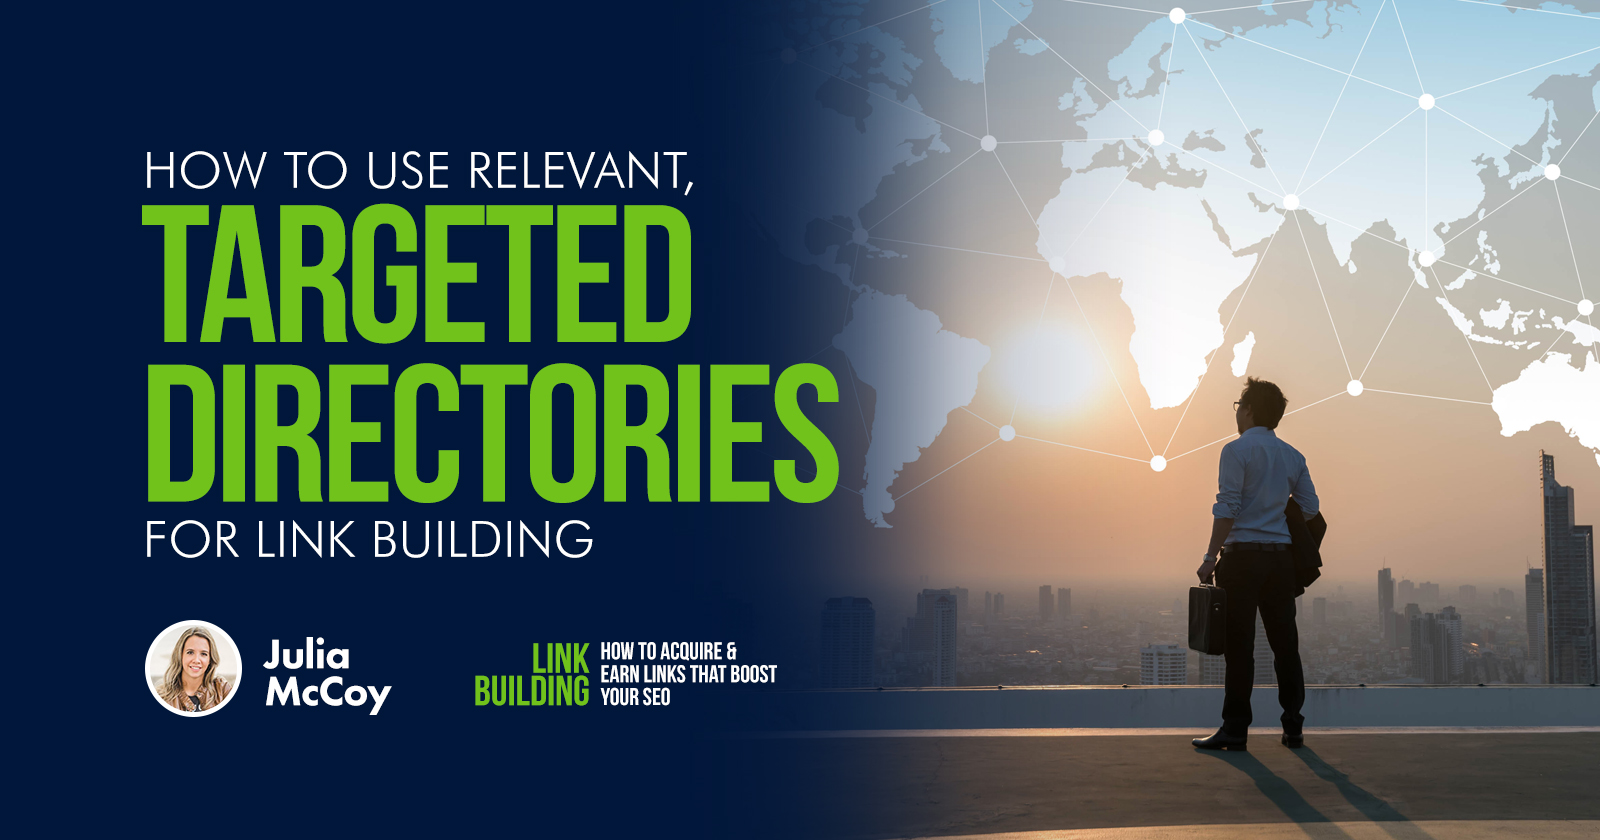 lb guide how to use relevant targeted directories for link building julia mccoy